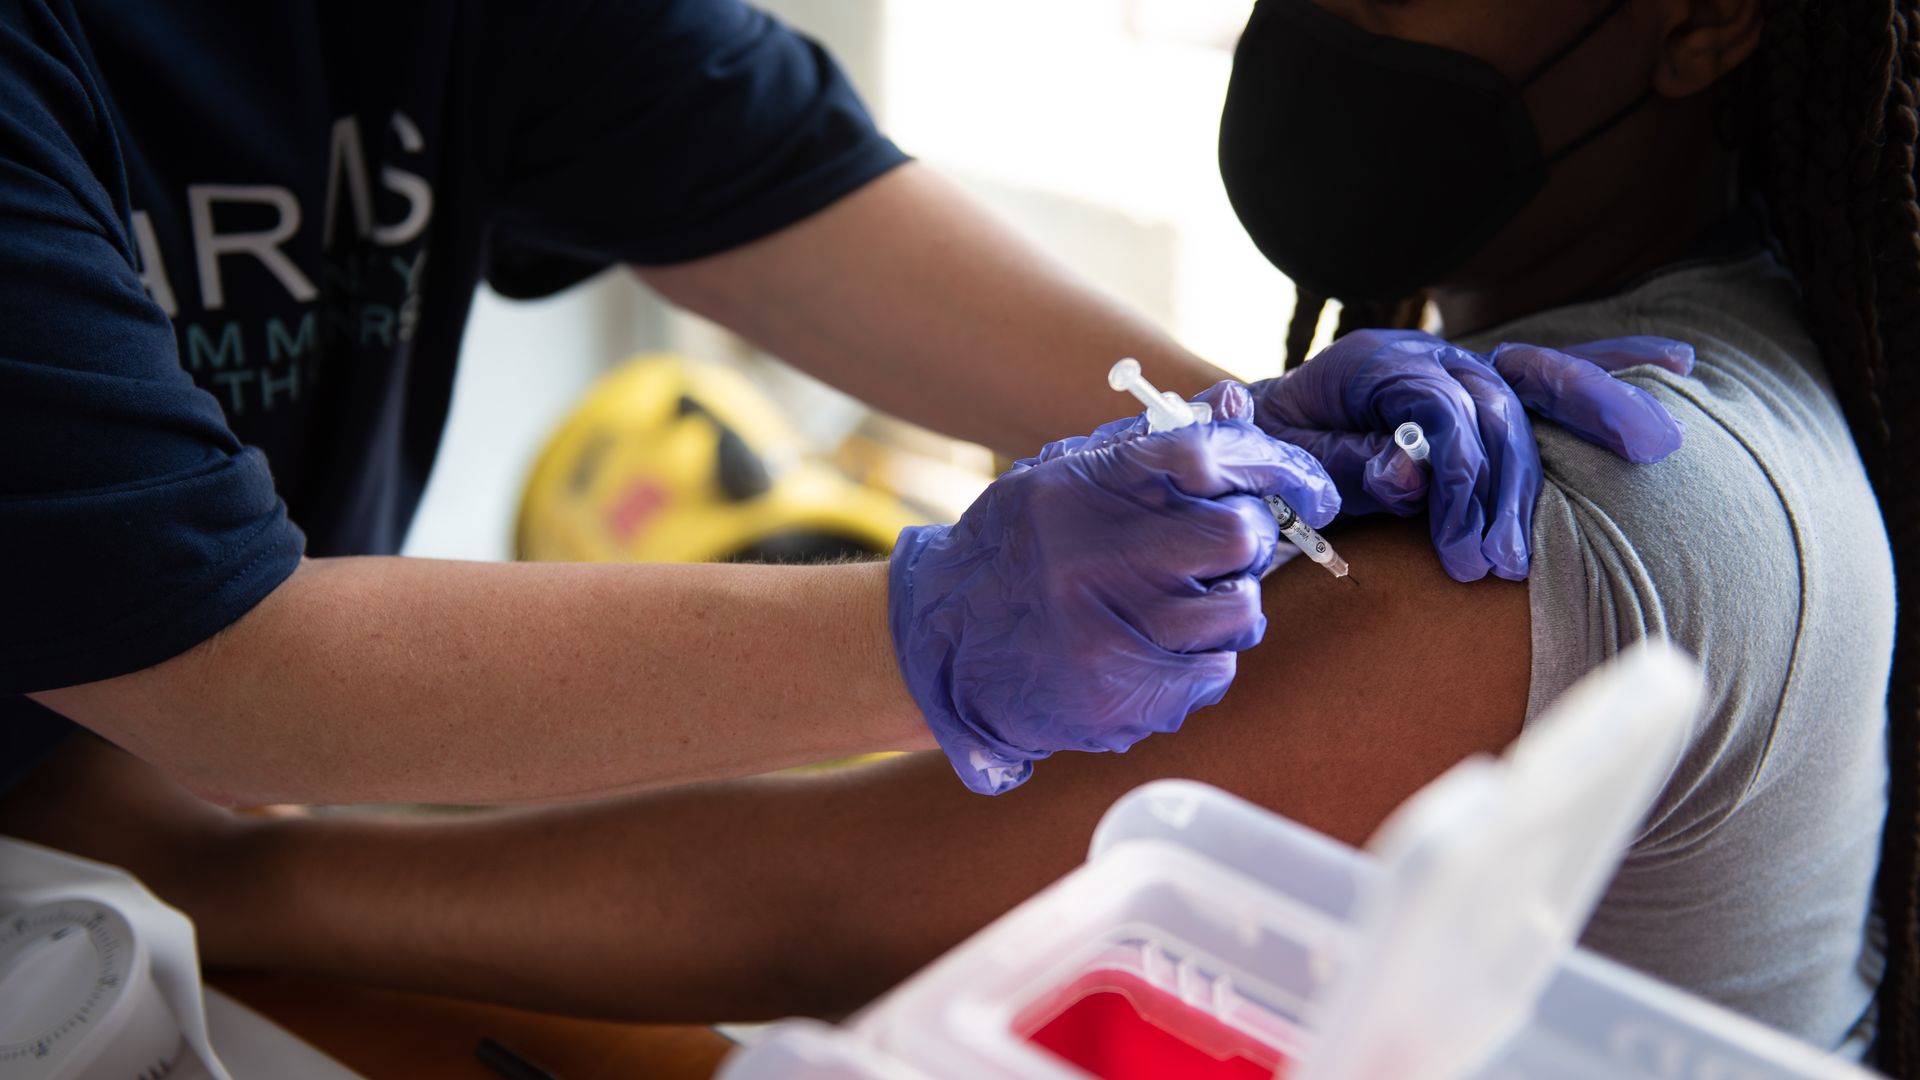 A healthcare worker administers a dose of the Pfizer-BioNTech Covid-19 vaccine during a vaccination event in Birmingham, Alabama, U.S.